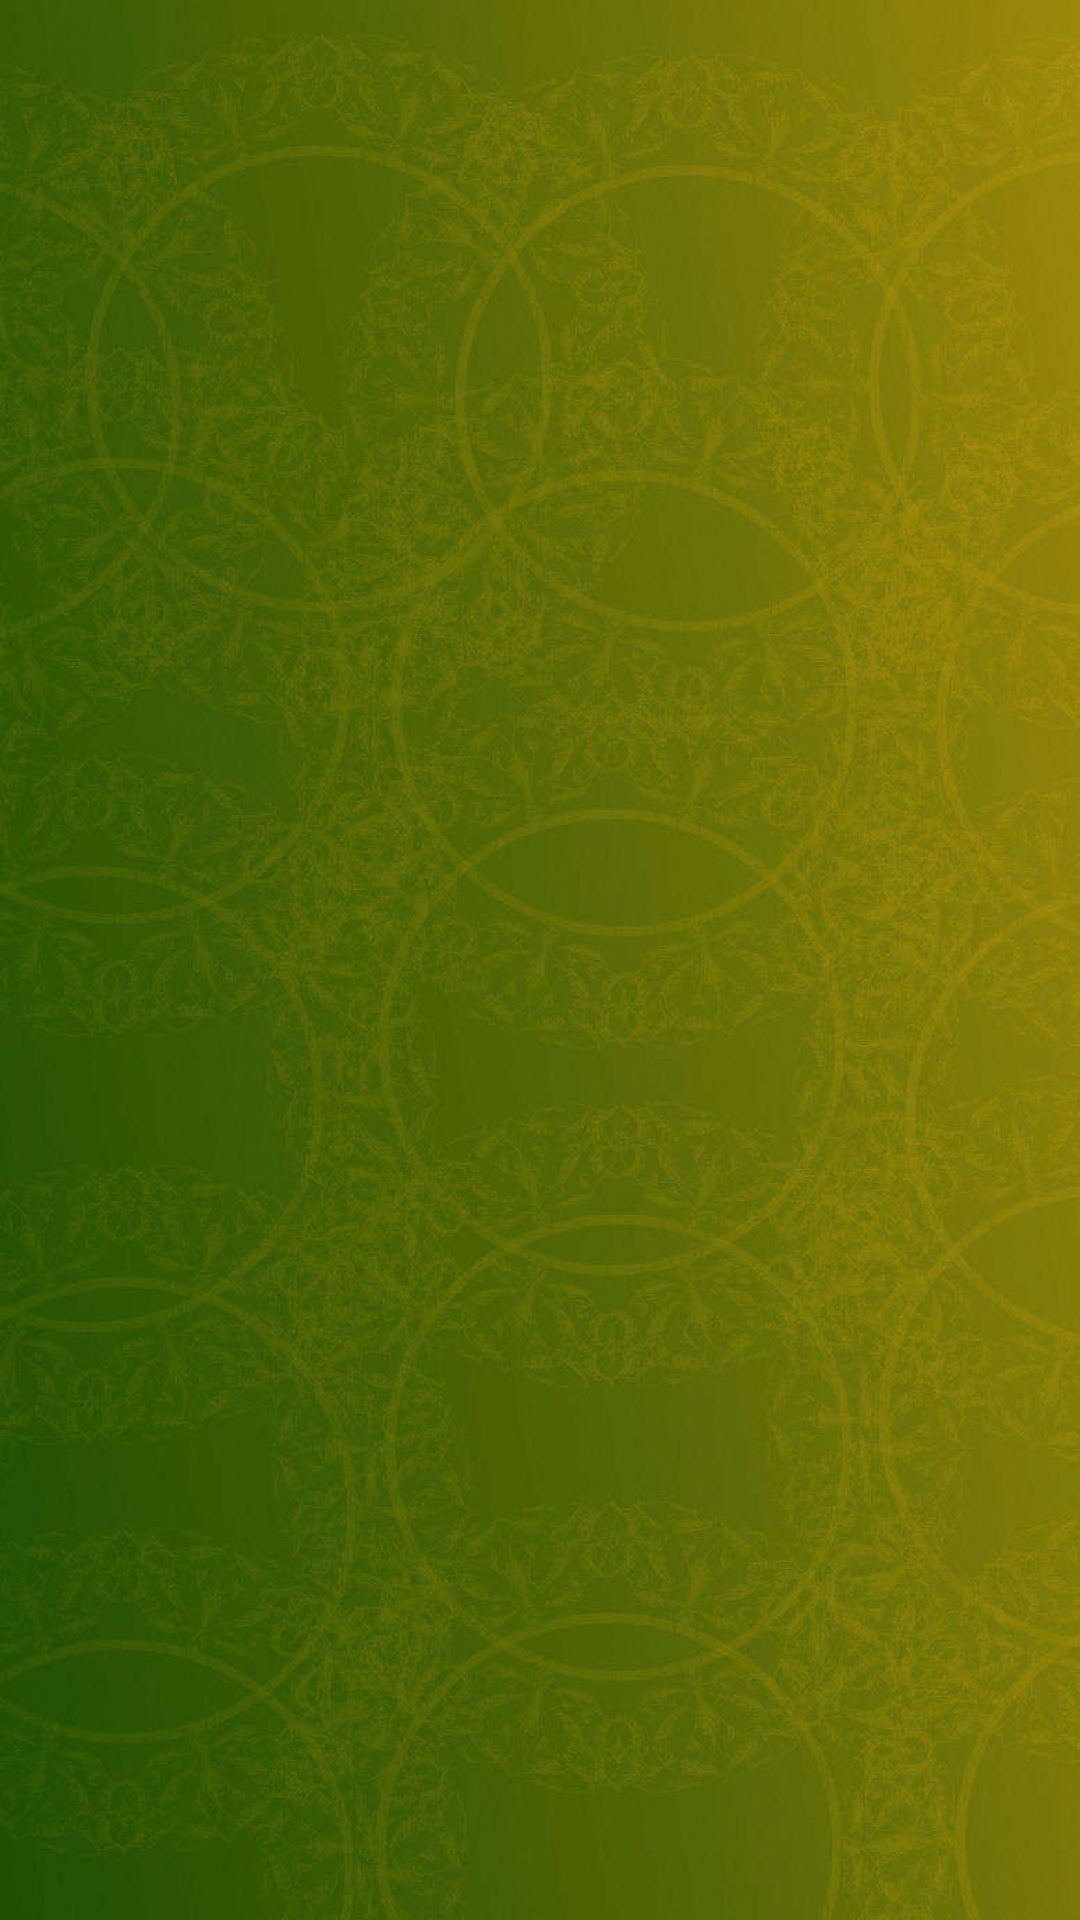 1080x1920 green and gold wallpaper